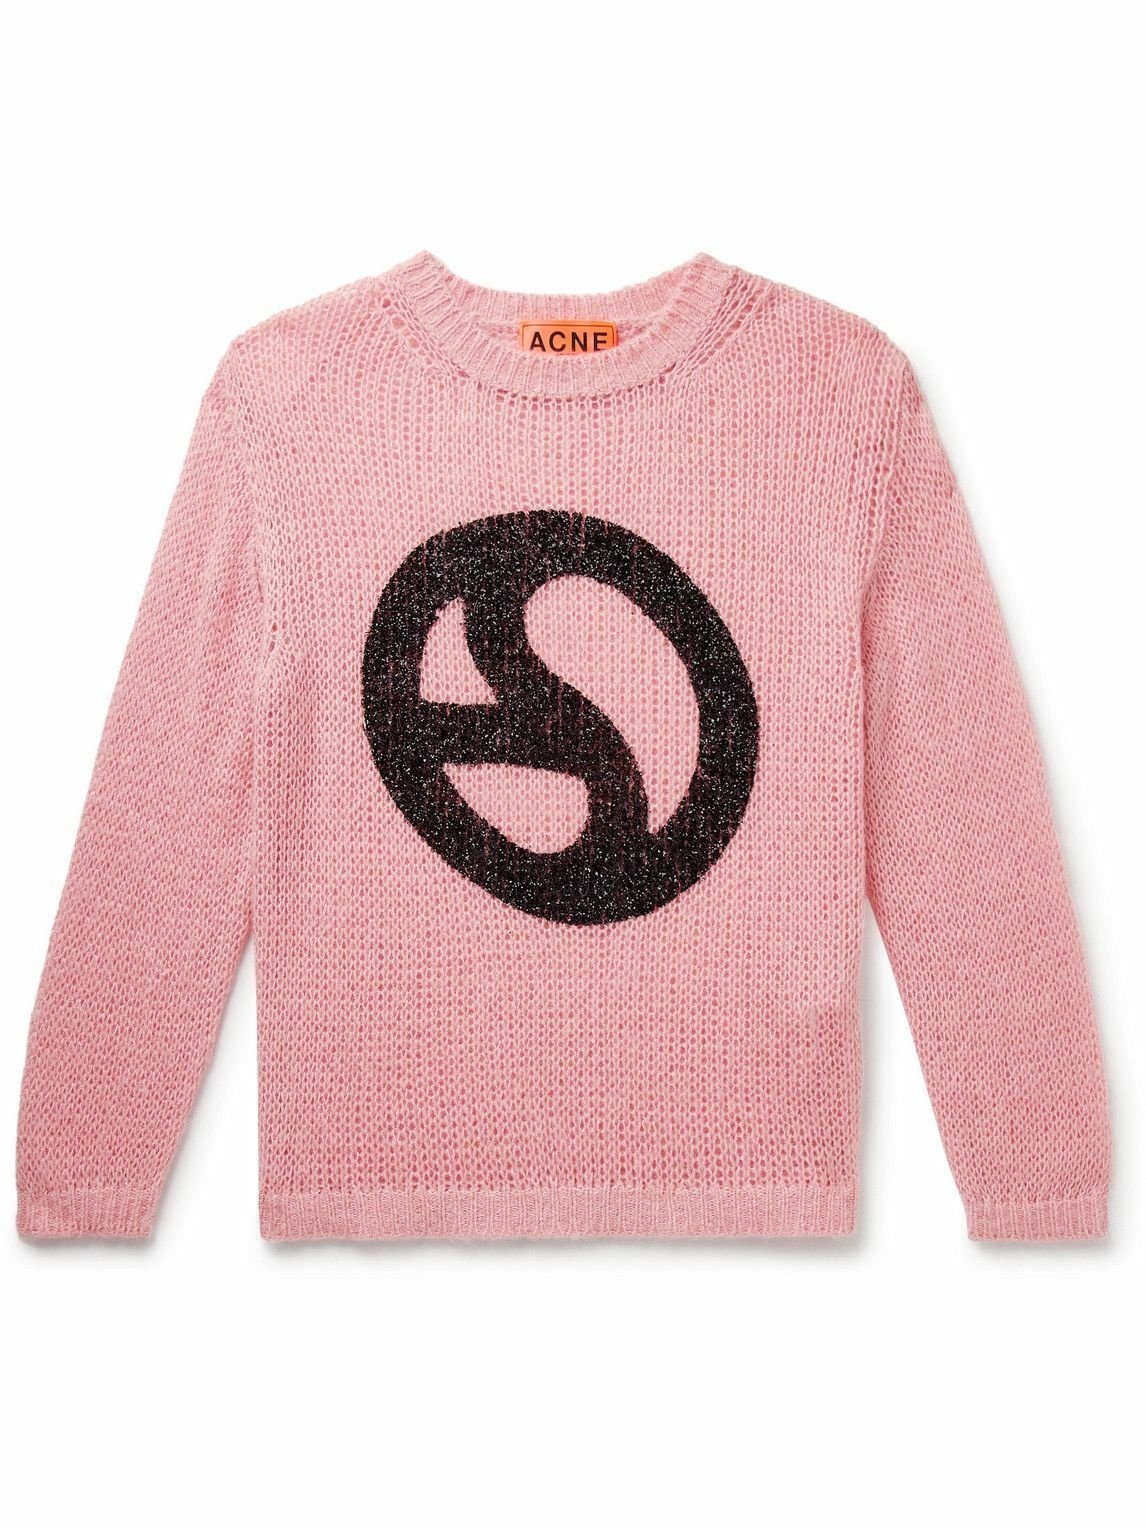 Photo: Acne Studios - Kitaly Glittered Logo-Print Knitted Sweater - Pink